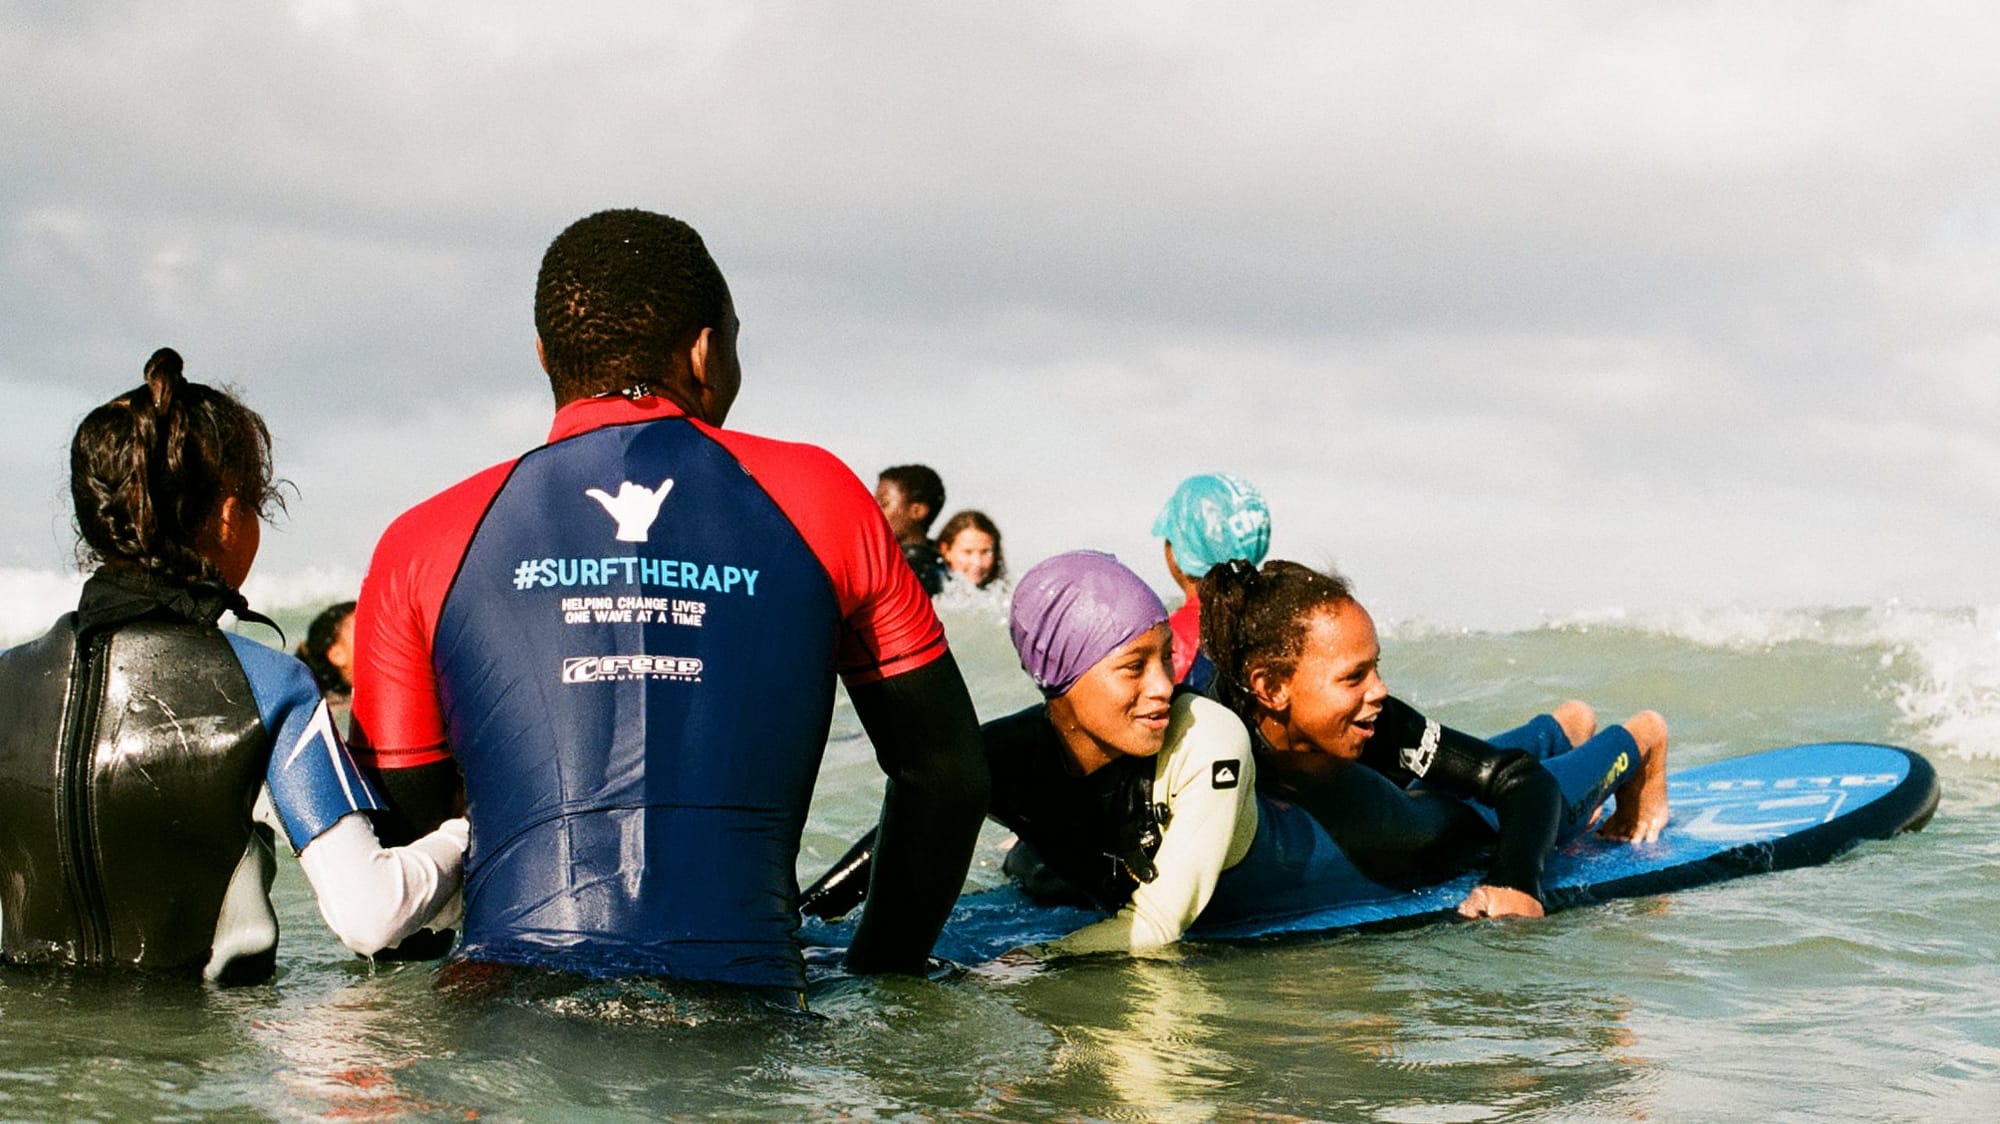 Image: two children in the ocean on a surfboard being held in place by a coach who sports a #SurfTherapy graphic on their shirt